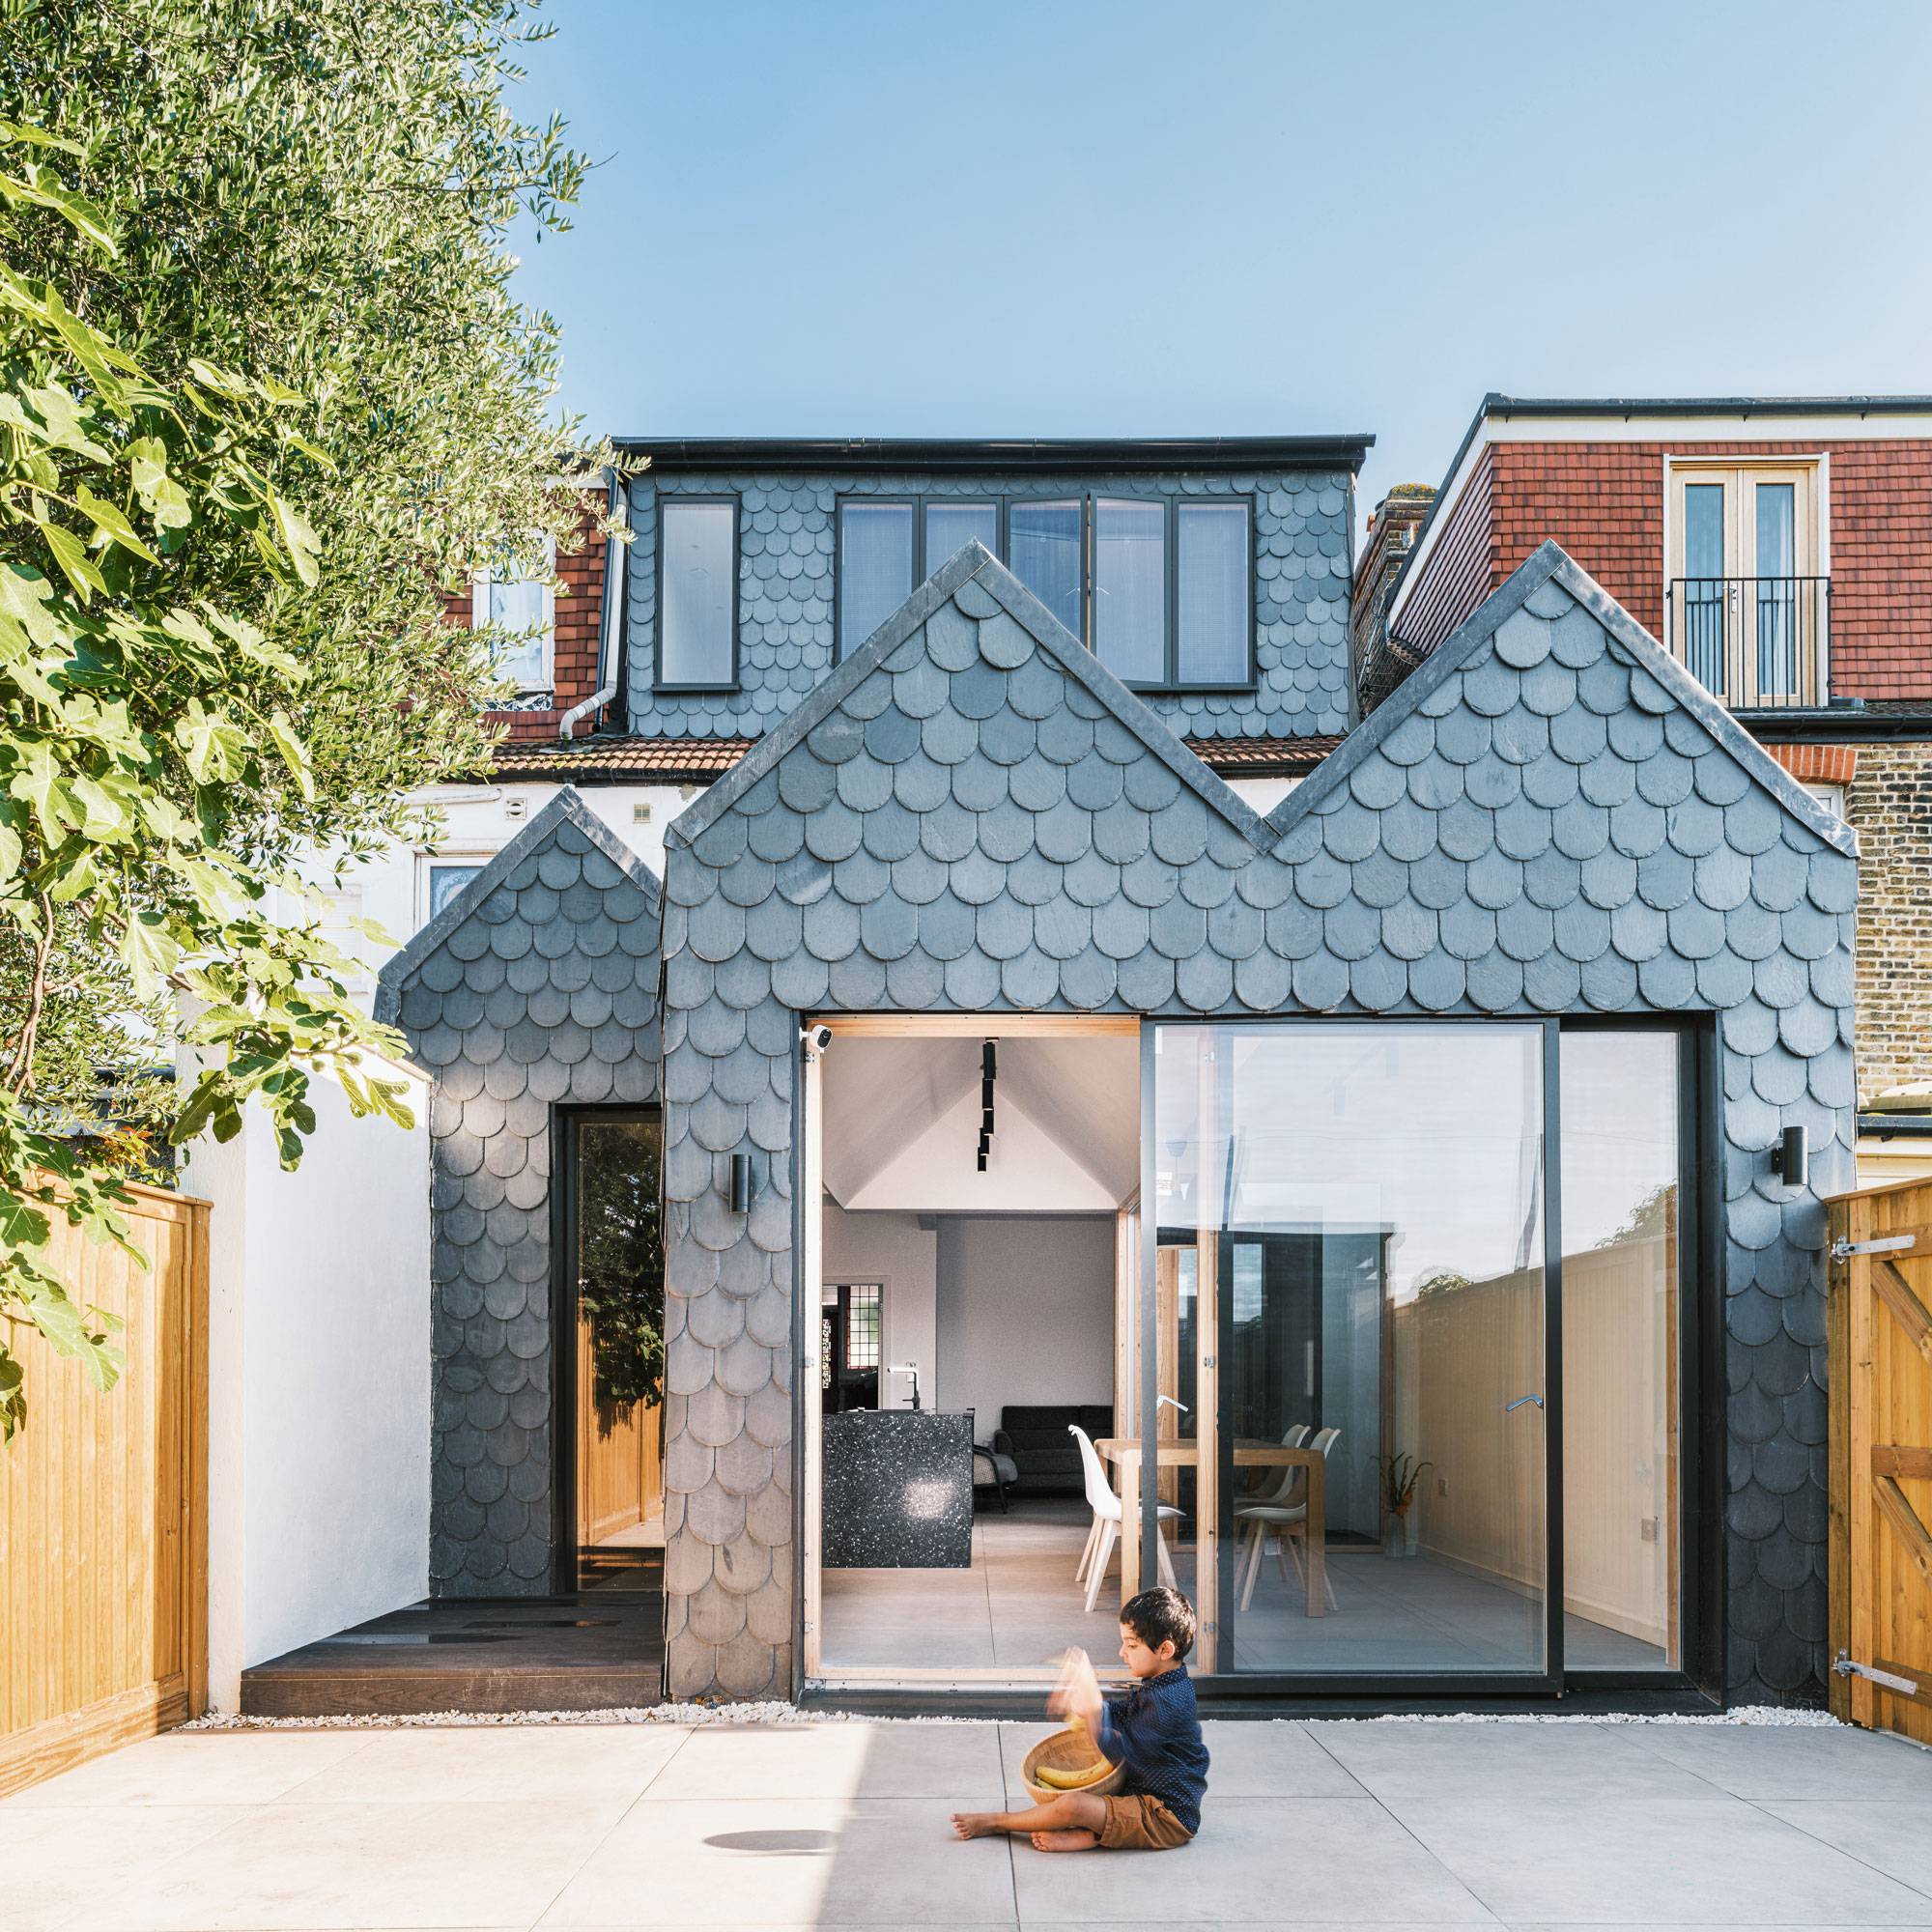 exterior image of an extension covered in fish scale slate tiles